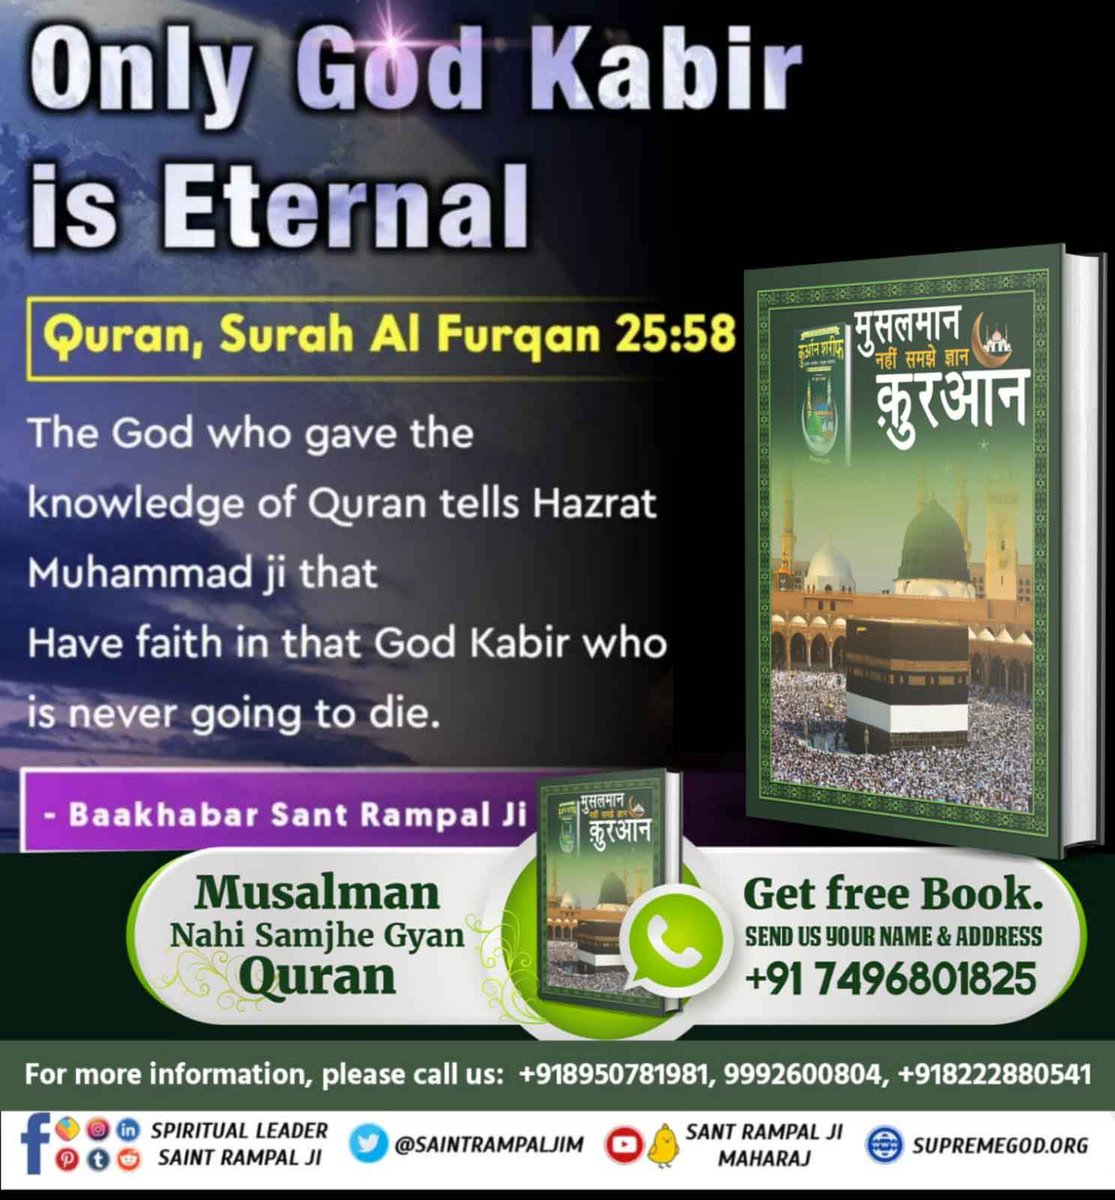 #अल्लाह_का_इल्म_बाखबर_से_पूछो 
Today, Baakhabar is 
present on Earth. Who is He, and where is He?

To know, Must read the sacred book Musalman Nahi Samjhe Gyan Quran
~Baakhabar Sant Rampal Ji